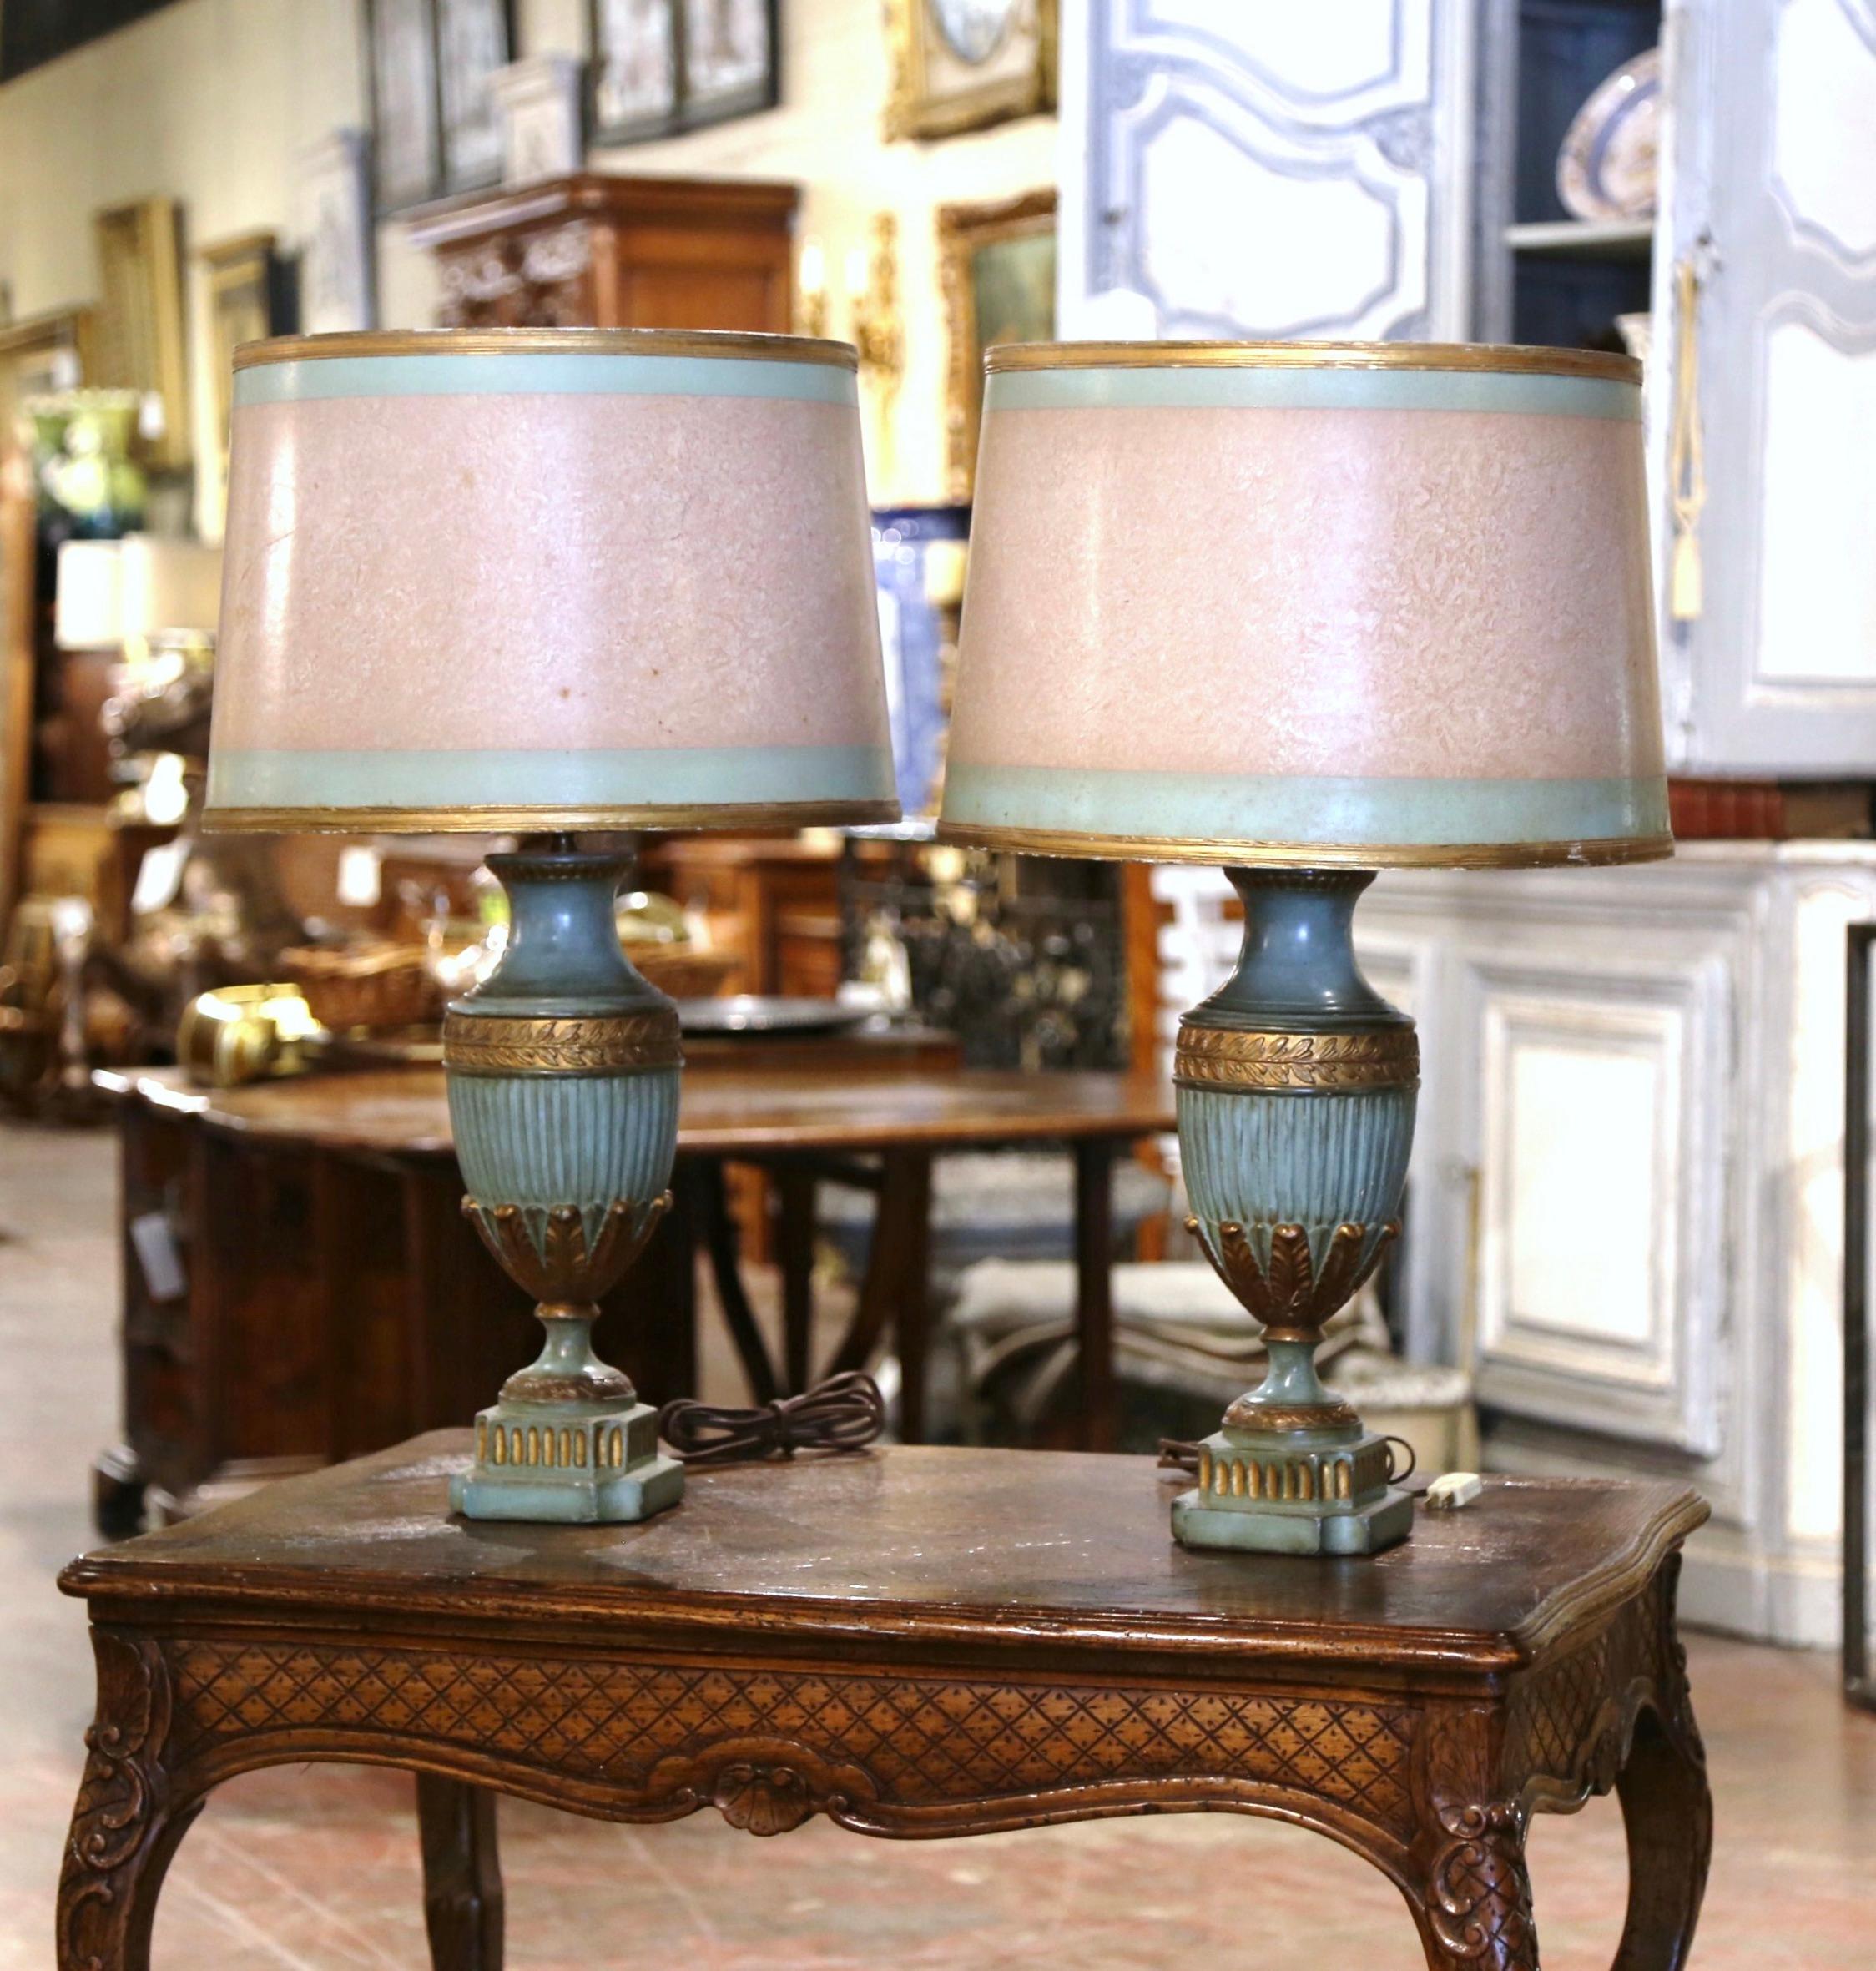 Gilt Pair of Mid-Century Italian Carved Painted Urn-Shape Table Lamps with Shades